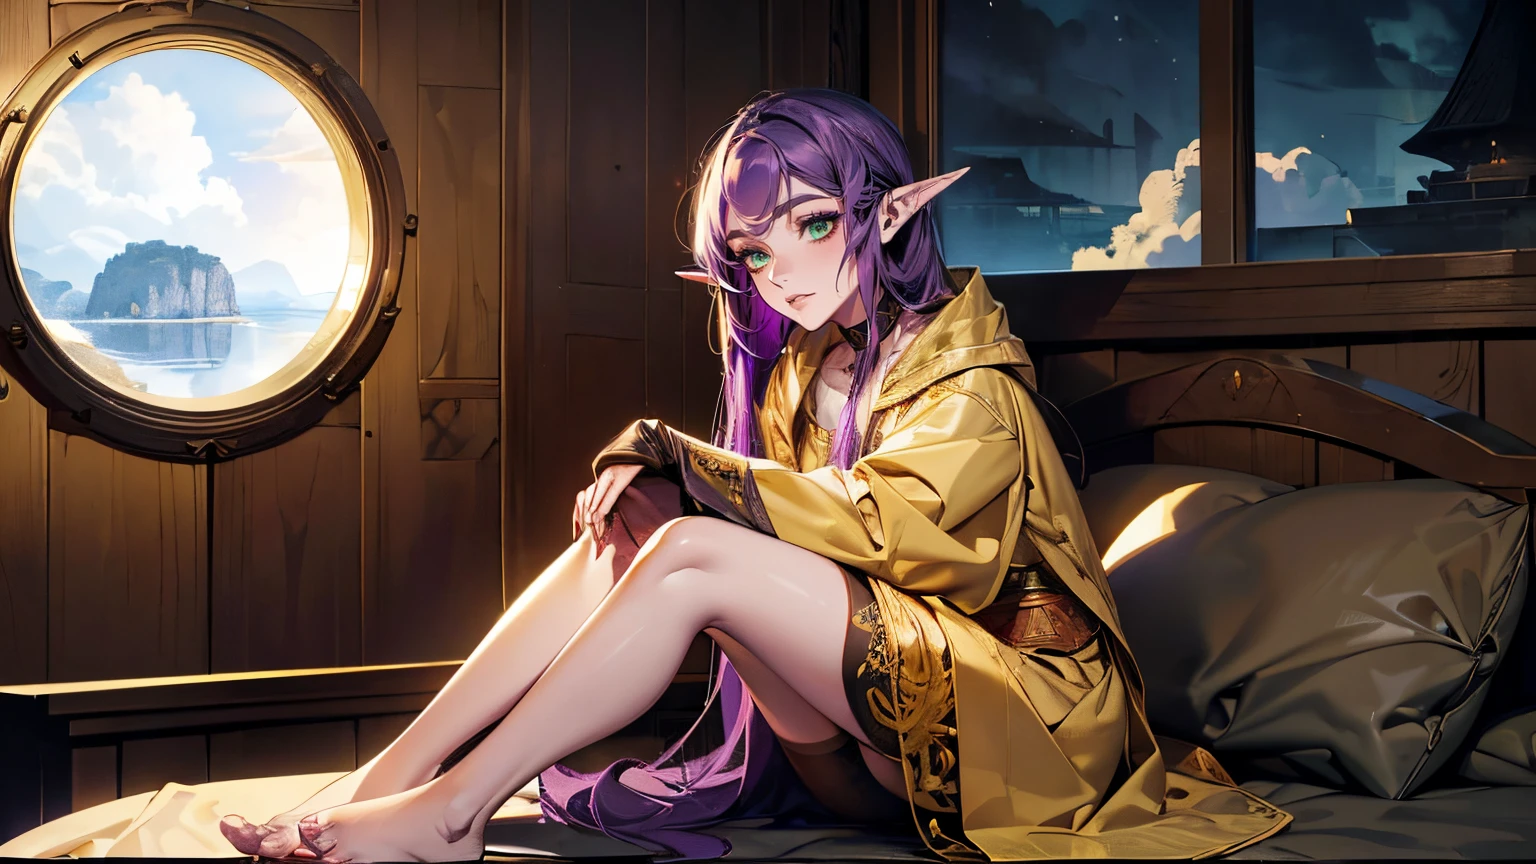 masterpiece, high quality, inside wooden ship cabin, boat cabin, porthole, circle shaped window, 1_woman, (full body), tall, ((petite figure)), (exotic skin_complexion:1.4), beautiful, exotic, with long elf ears, looking away from viewer, ((looking out window)), clouds outside window, sitting, sitting on bed, hands together, knees together, wearing (yellow hooded cloak), yellow robes, black choker, black dress, (black thigh highs with purple embroidery), bare feet, long fingerless leather gloves, medium_bust, bright purple hair, long hair, wavy hair, realistic and detailed face having (green_eyes), dark_eyeliner, long_eyelashes), perfect hands, dim lighting,